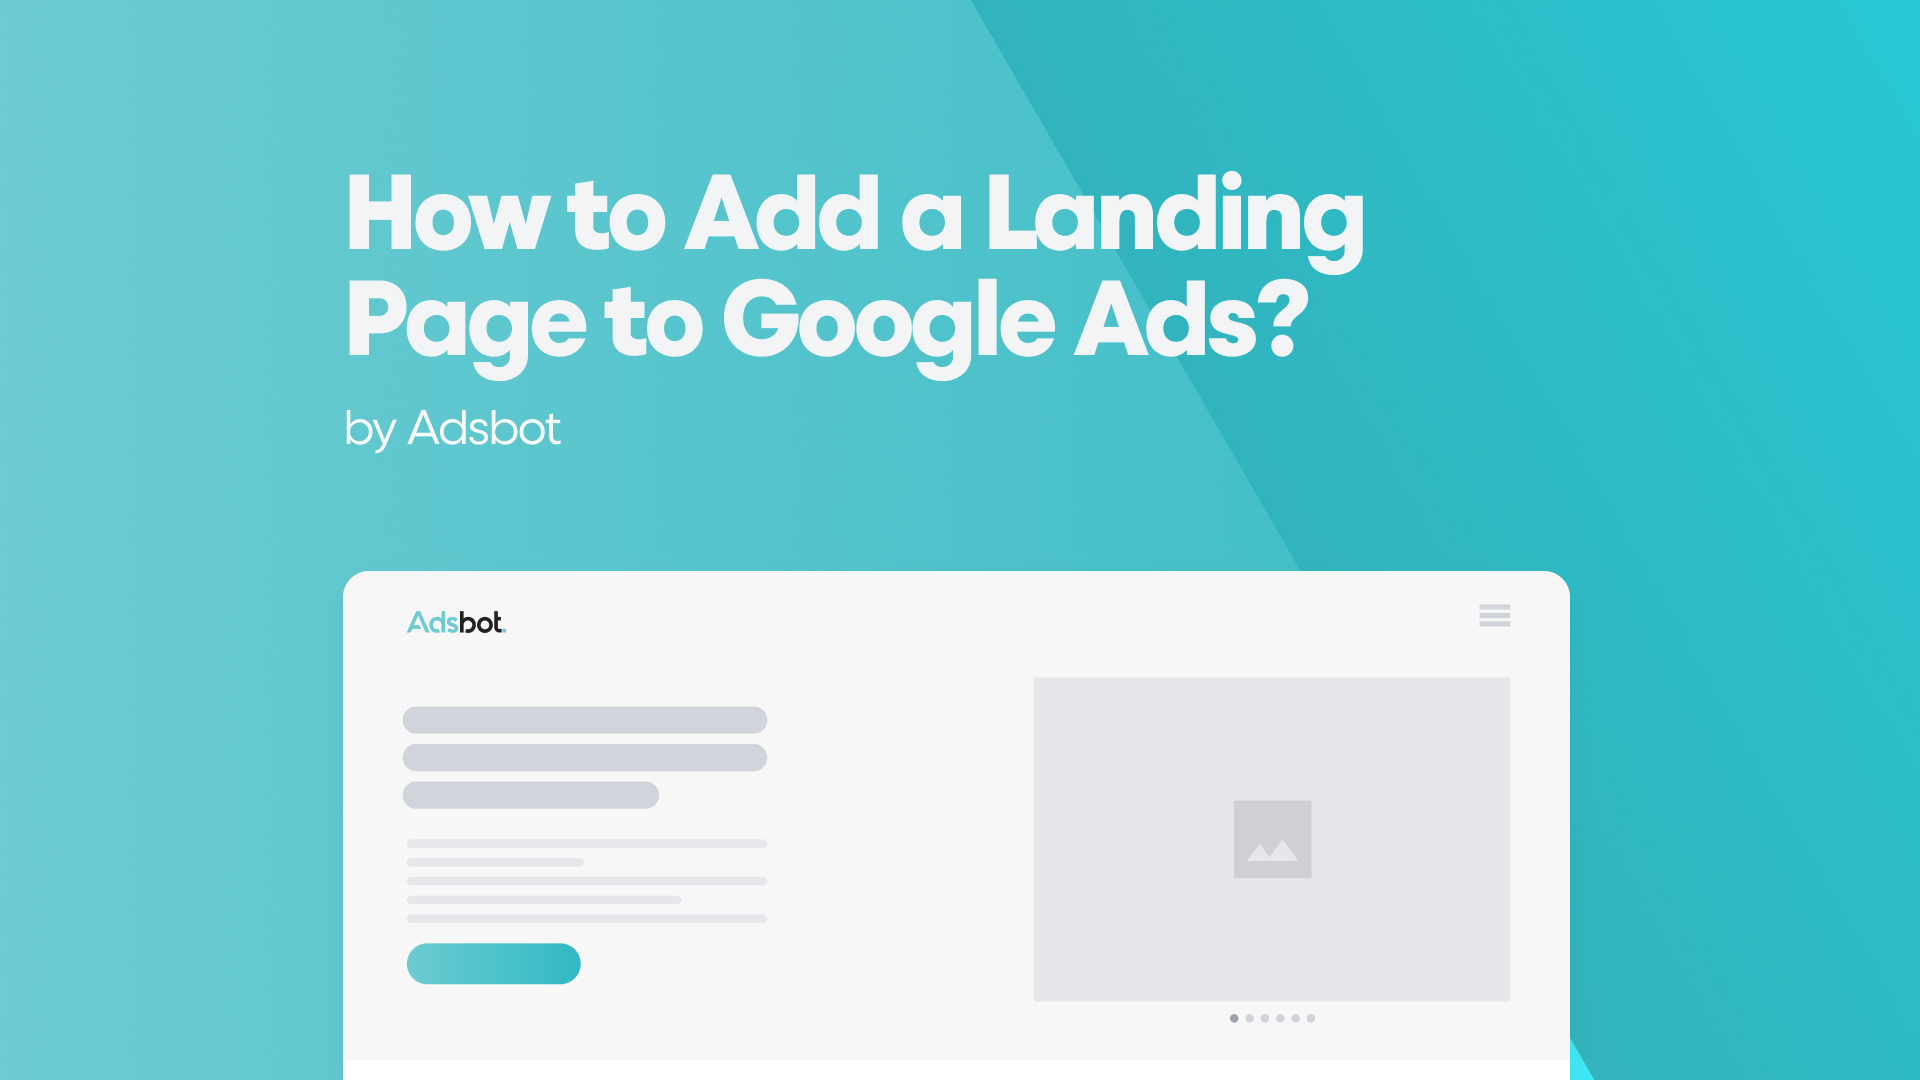 How to Add a Landing Page to Google Ads?